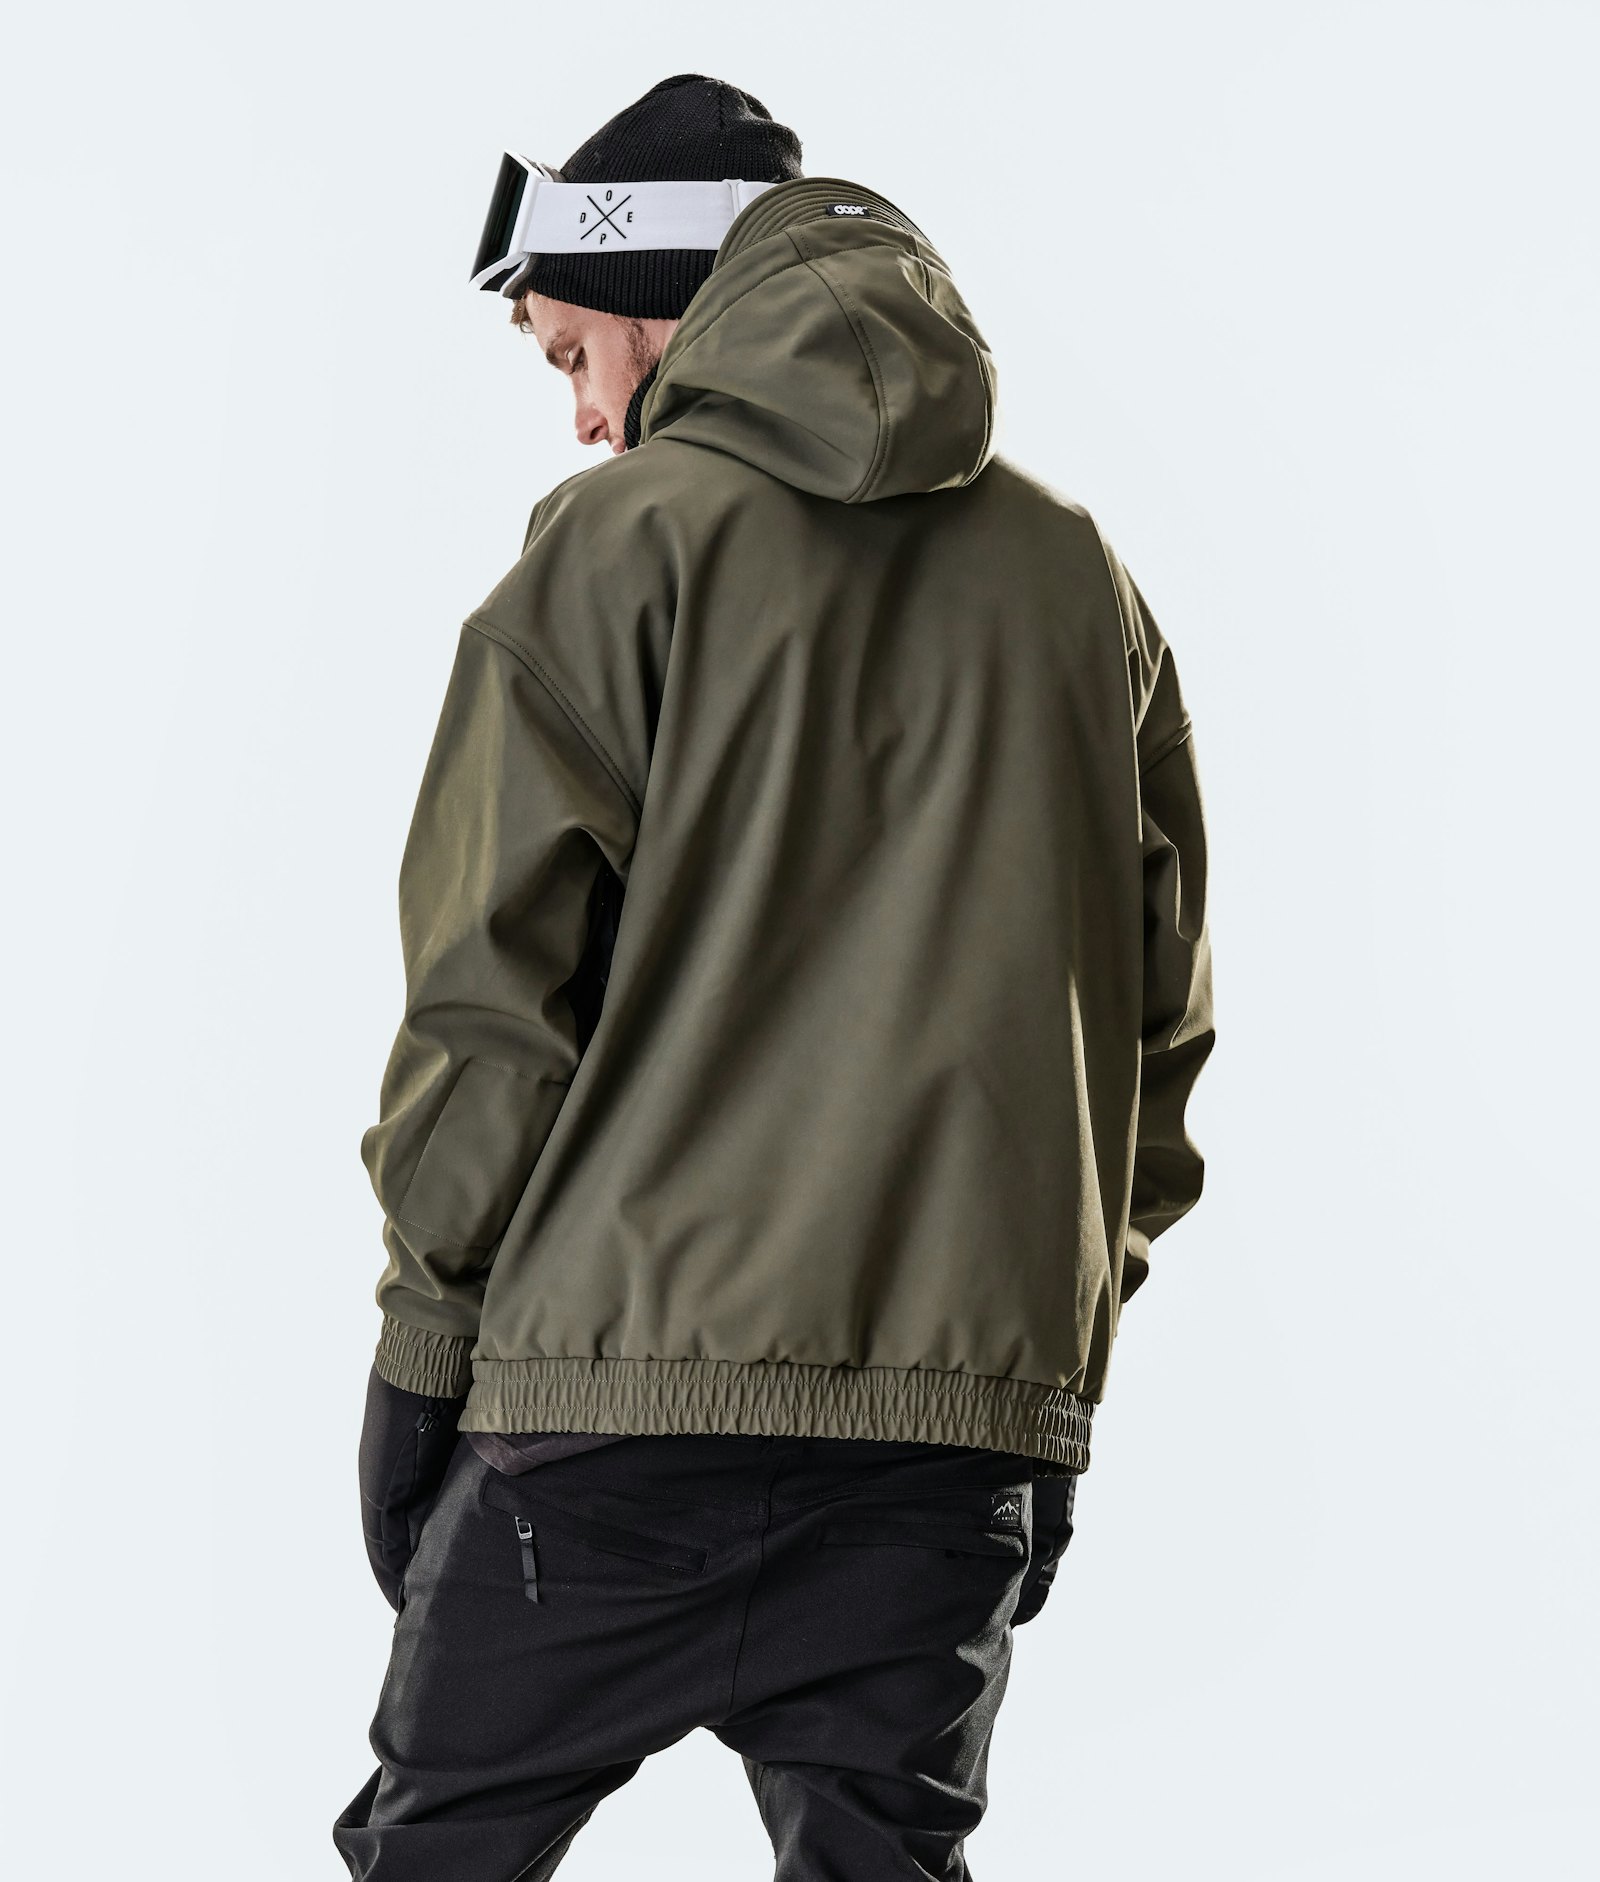 Cyclone 2020 Giacca Sci Uomo Olive Green